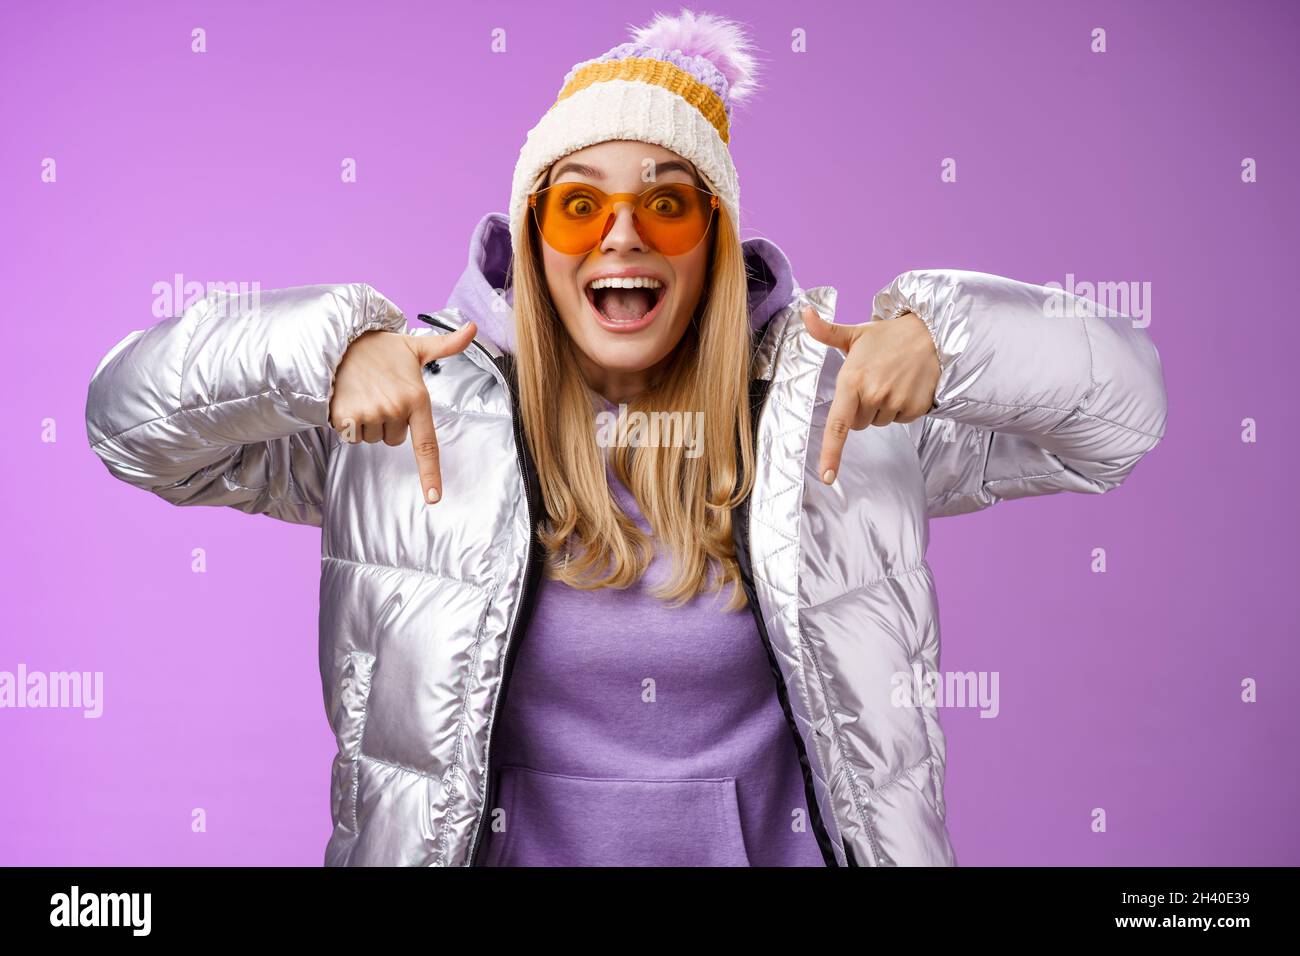 Excited impressed good-looking blond girl drop jaw amused overwhelmed pointing down index fingers checking out awesome promotion Stock Photo